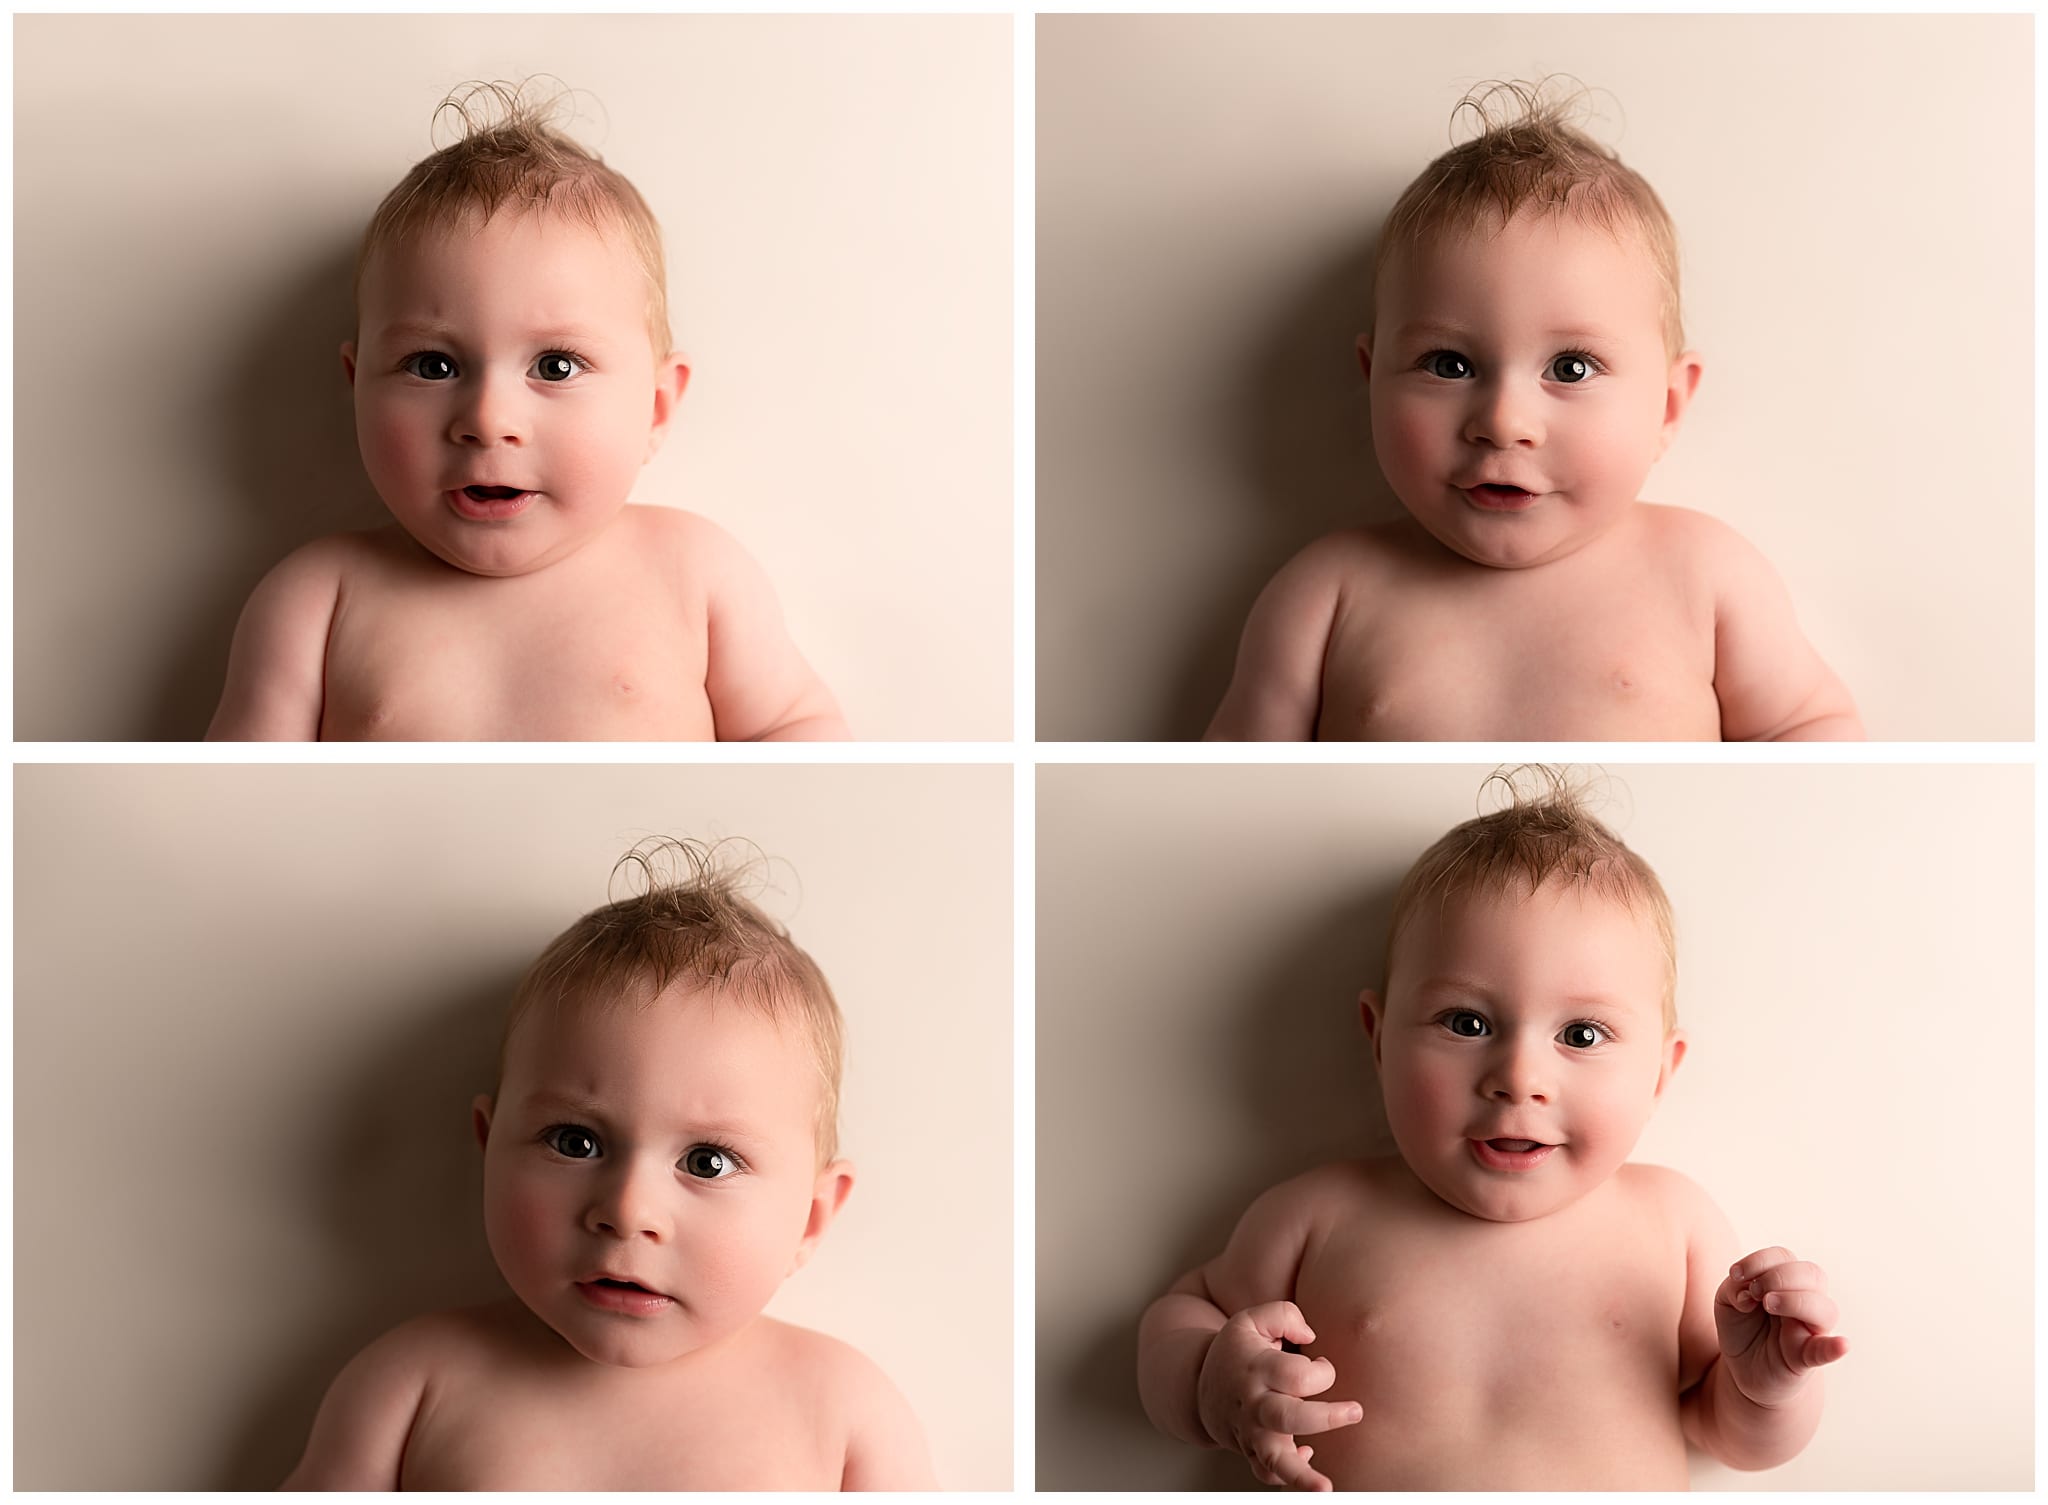 color collage of baby expressions